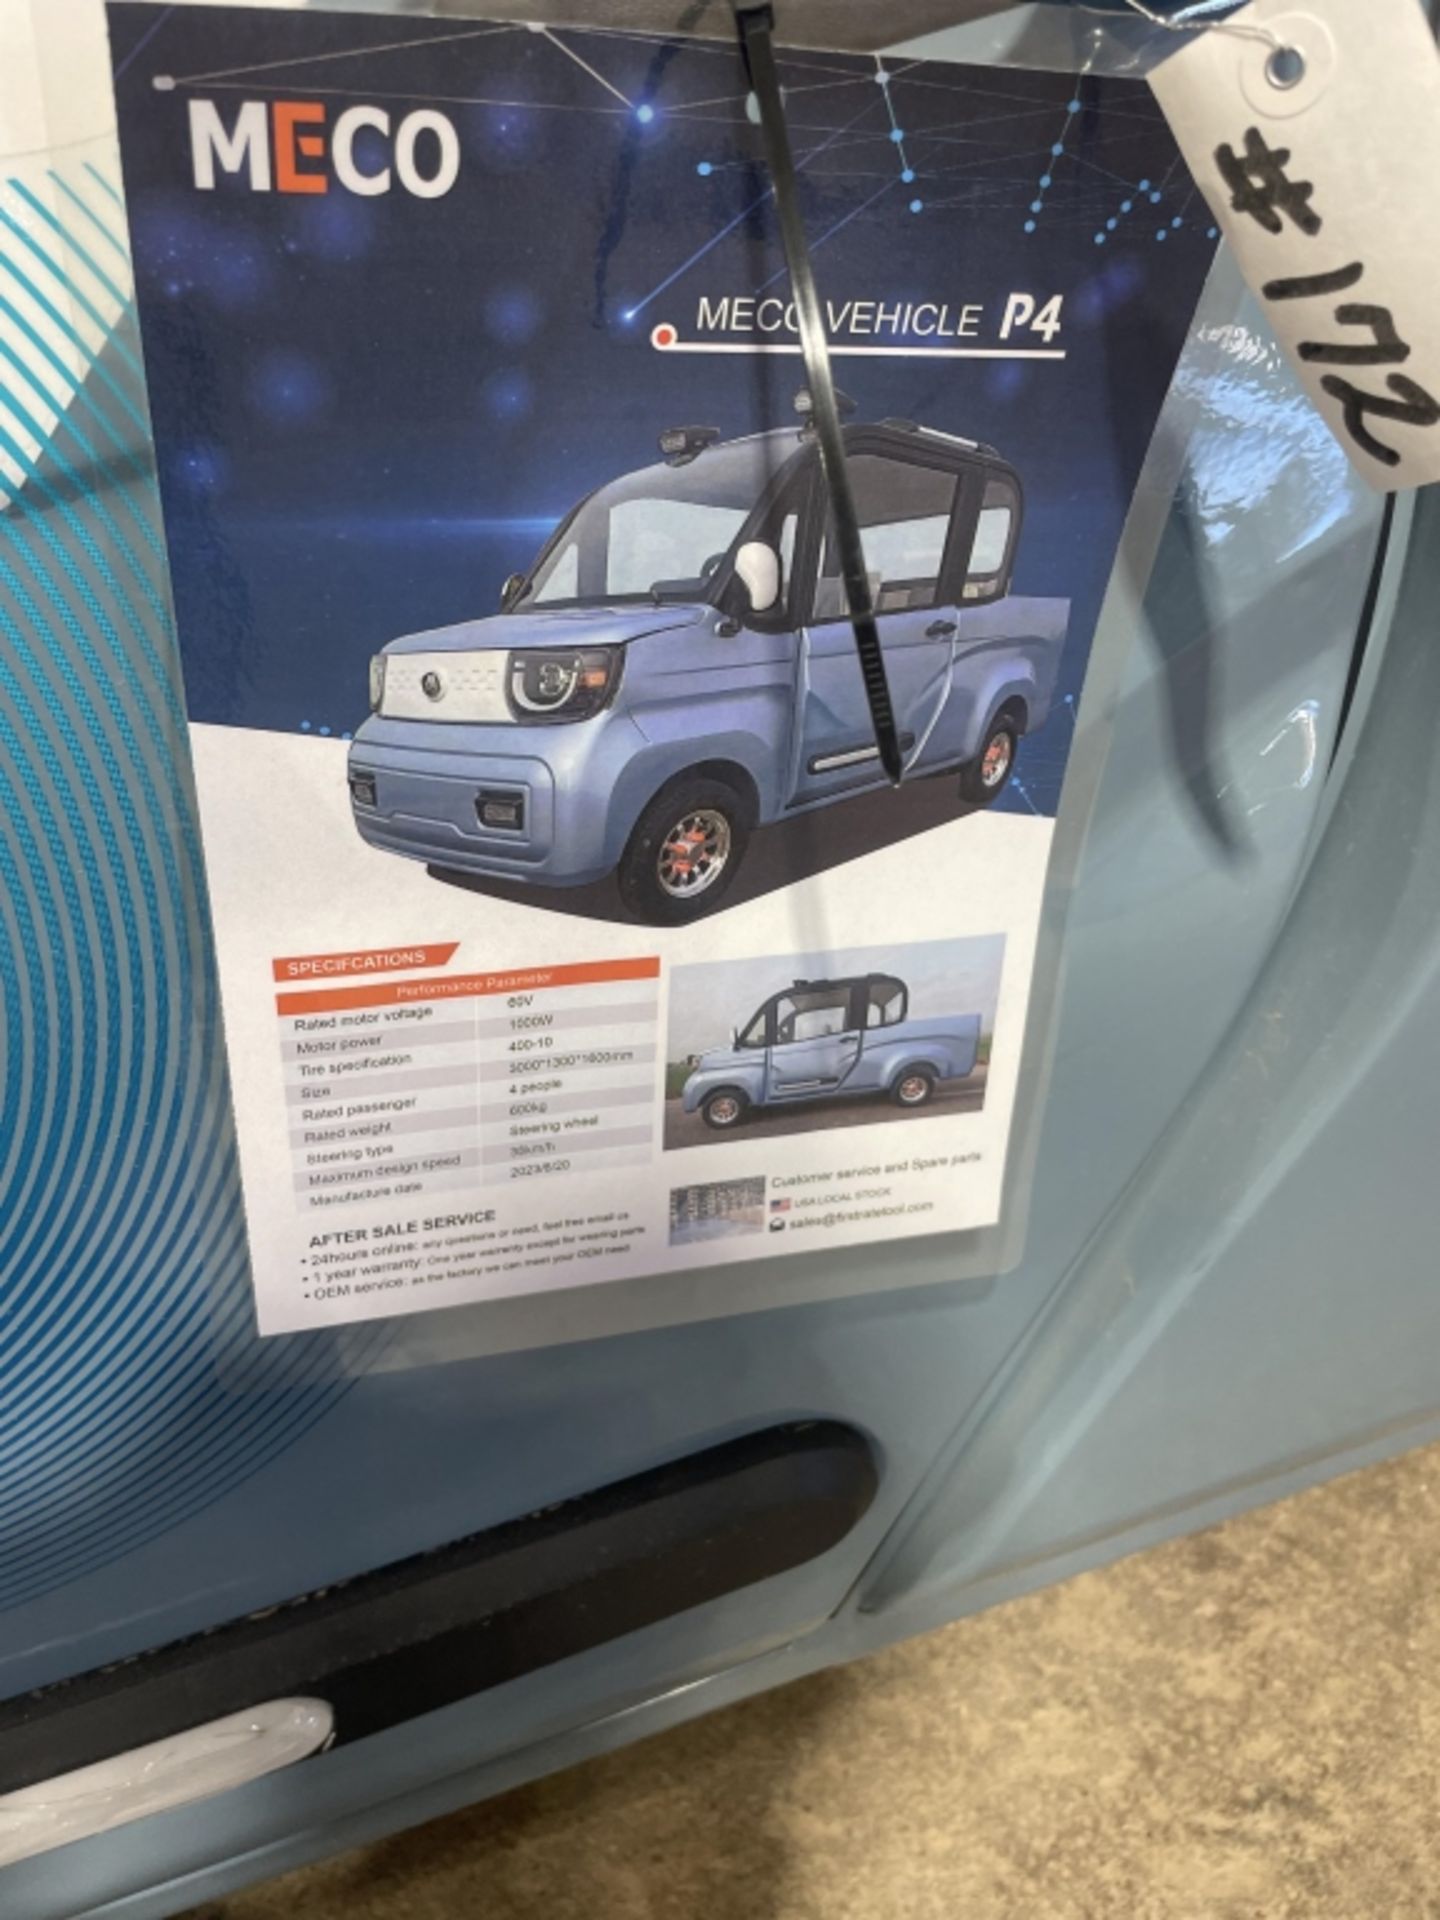 MECO P4 Electric Vehicle - Image 12 of 15